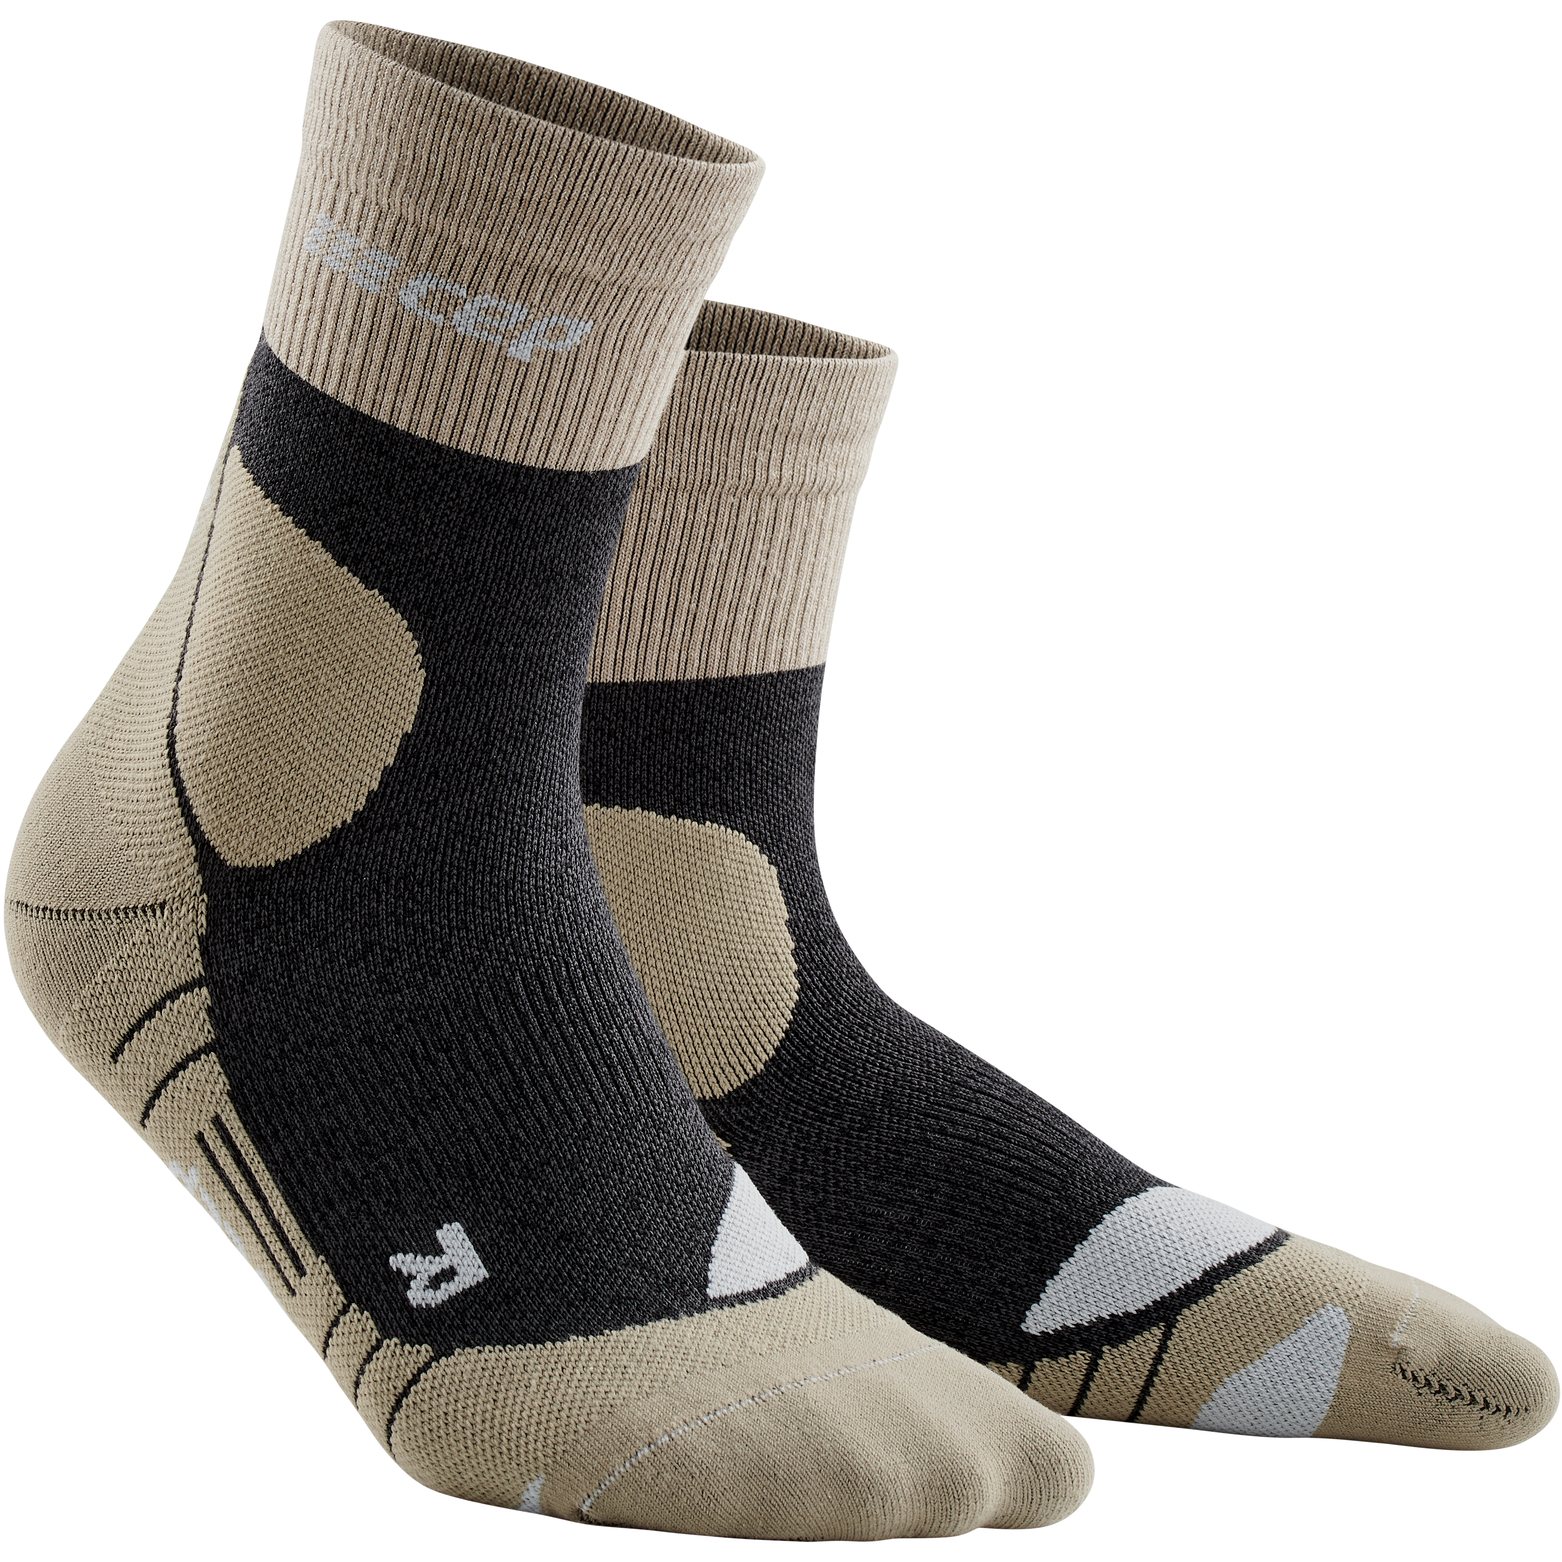 Picture of CEP Hiking Merino Mid Cut Compression Socks Women - sand/grey